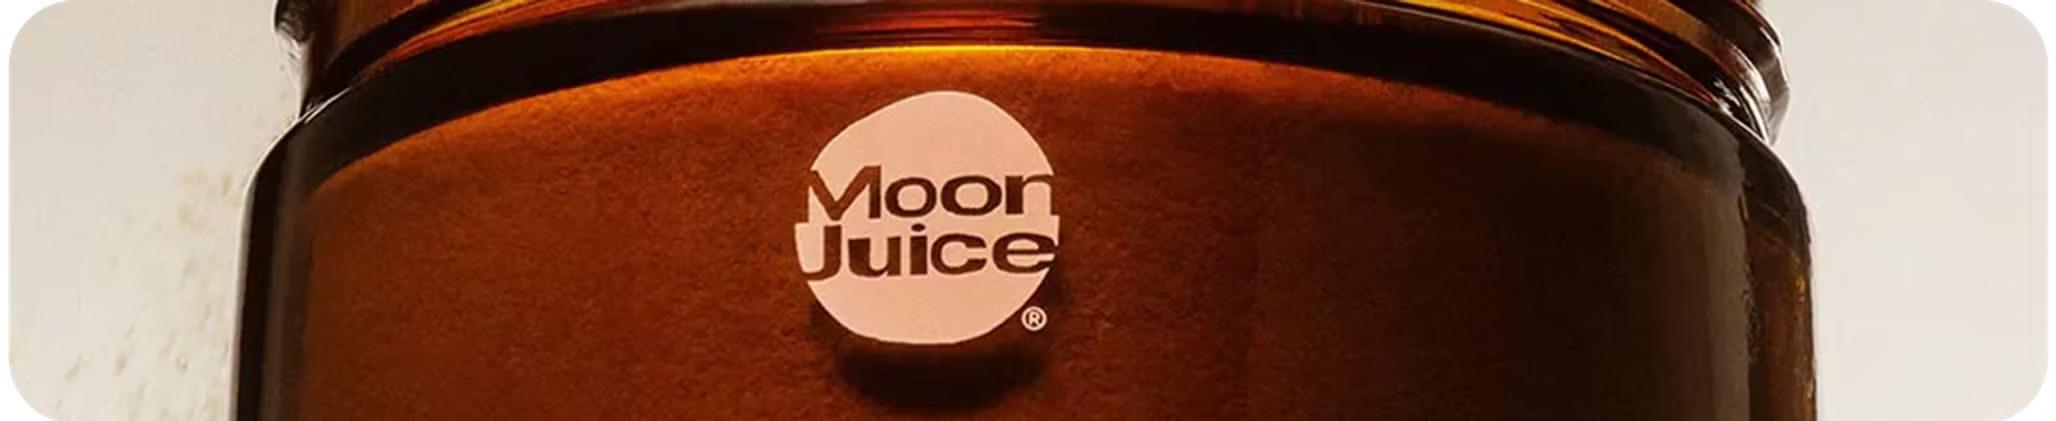 Moon Juice – MuteSix worked with the the adaptogenic beauty and wellness brand to increase return on ad spend, purchases and conversions with Facebook, Snapchat and Google.